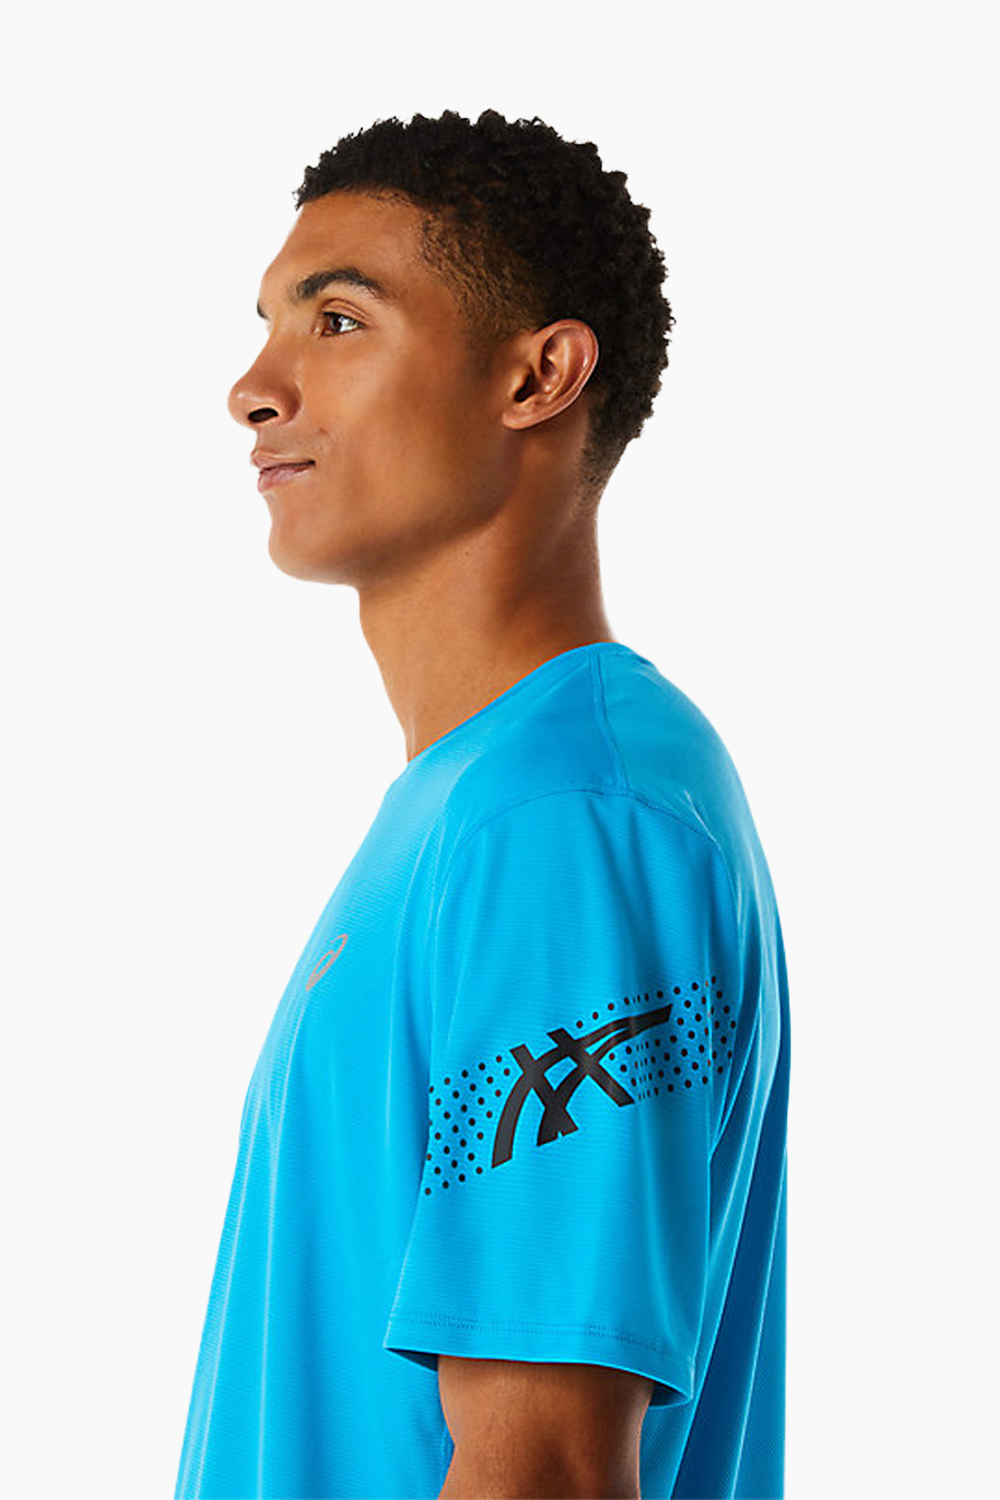 ASICS Men's Icon SS Top in Island Blue/Performance Black